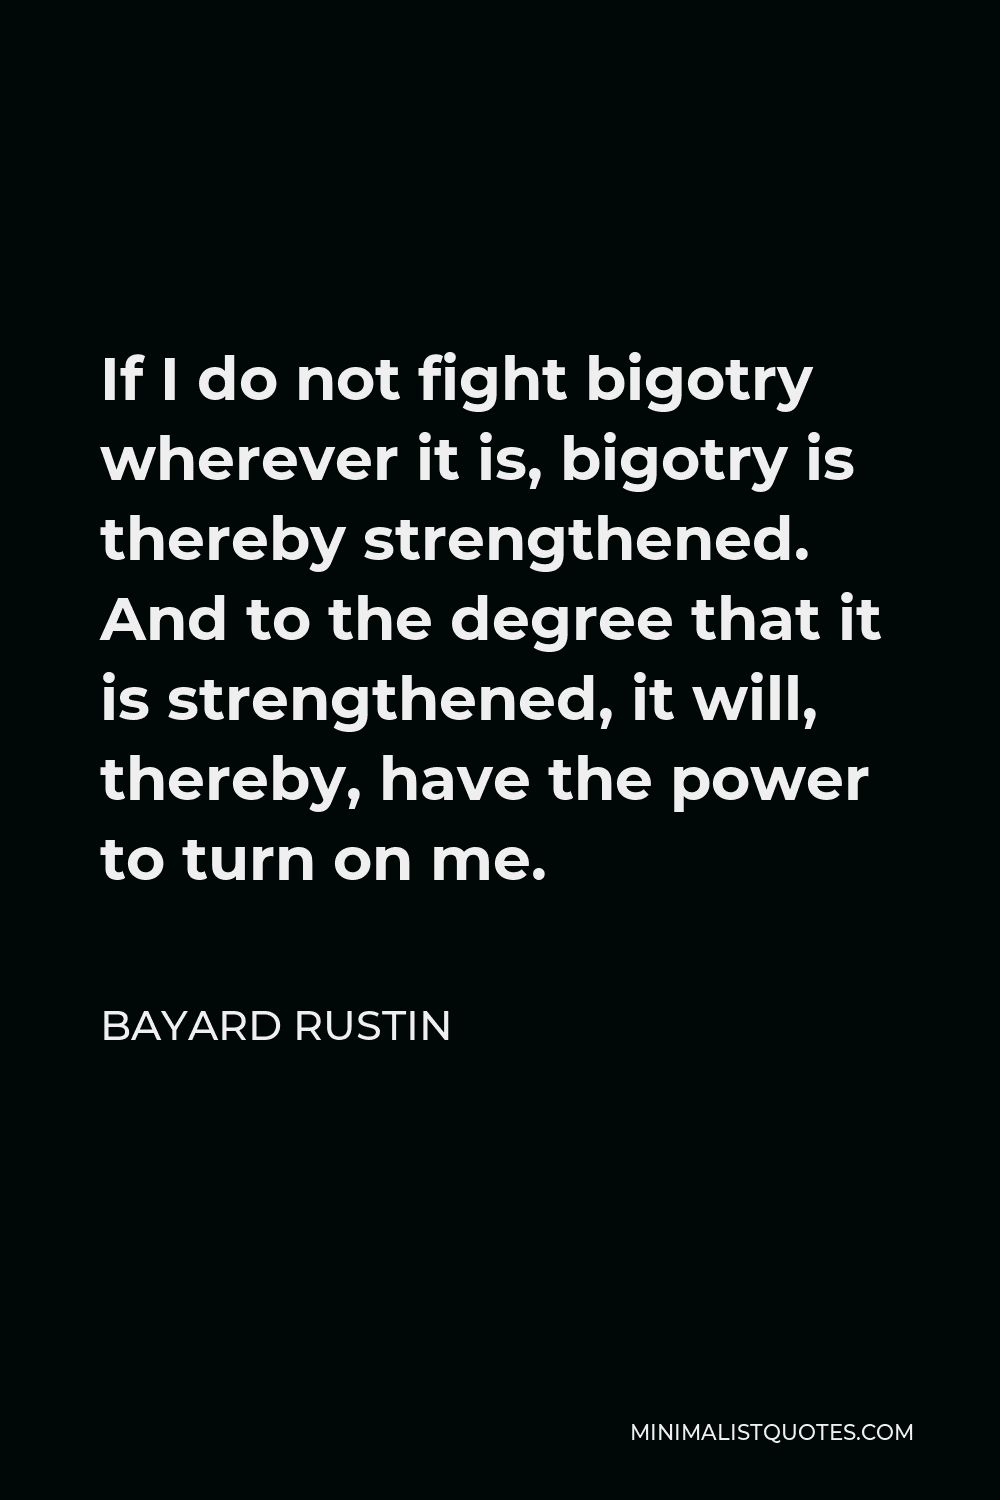 Bayard Rustin Quote - If I do not fight bigotry wherever it is, bigotry is thereby strengthened. And to the degree that it is strengthened, it will, thereby, have the power to turn on me.